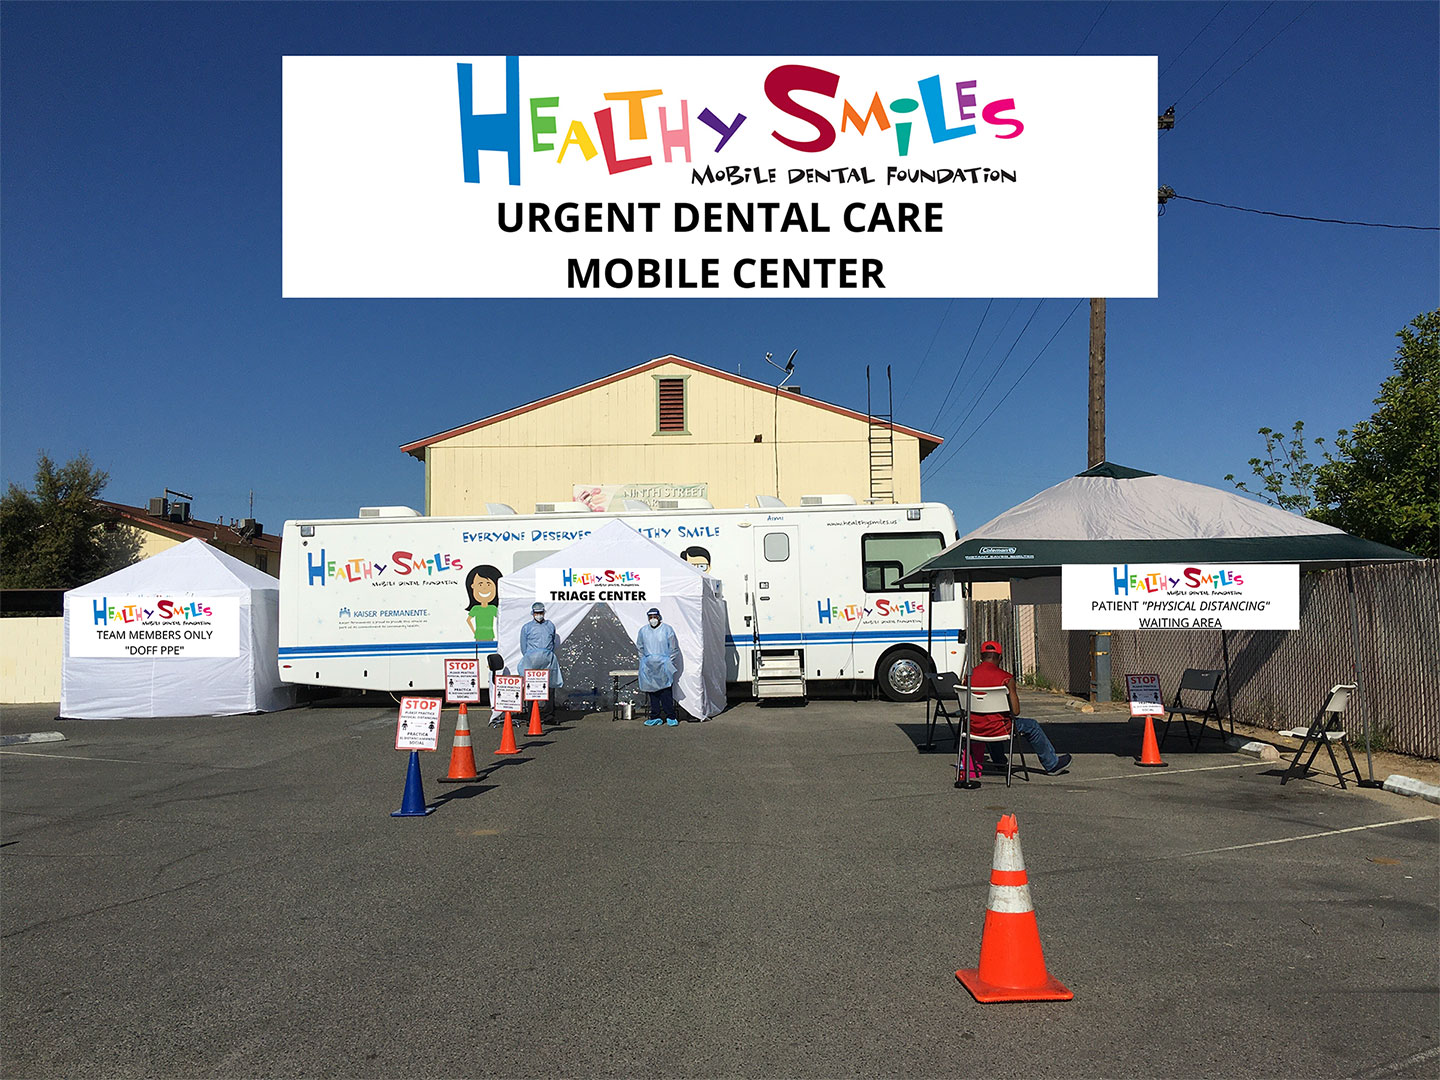 Homepage - Healthy Smiles Mobile Dental Foundation